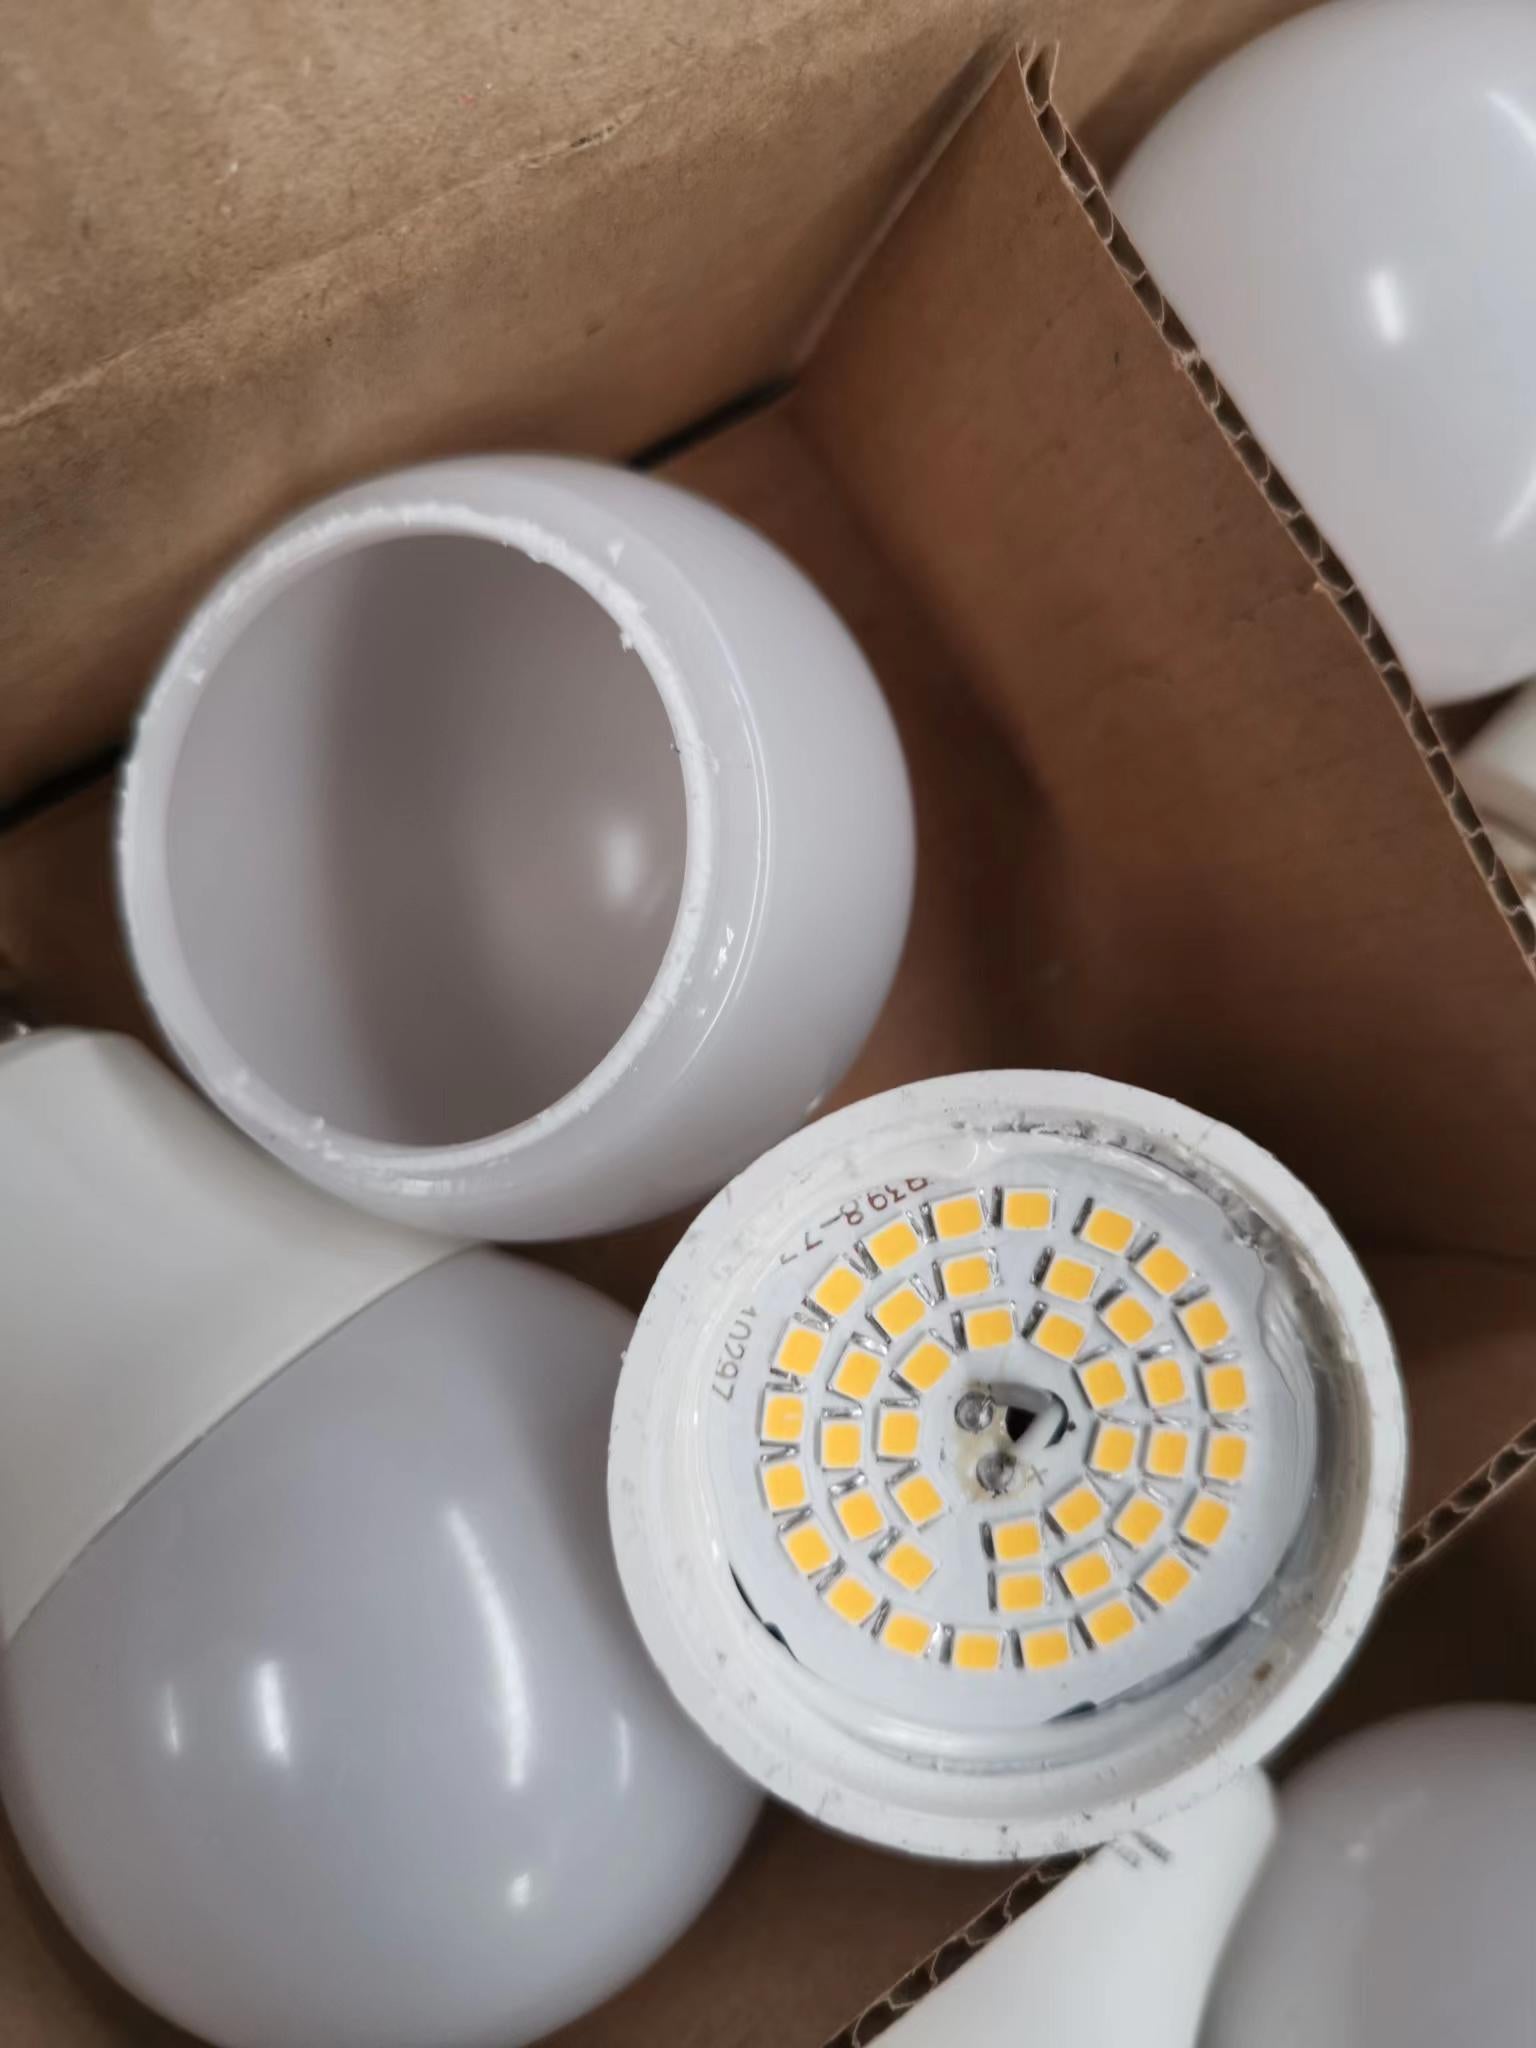 220V B22 or E27 Base Led A60 Globe Bulb 7W 980Lumen Veet and Ipart approved in Melbourne Warehouse